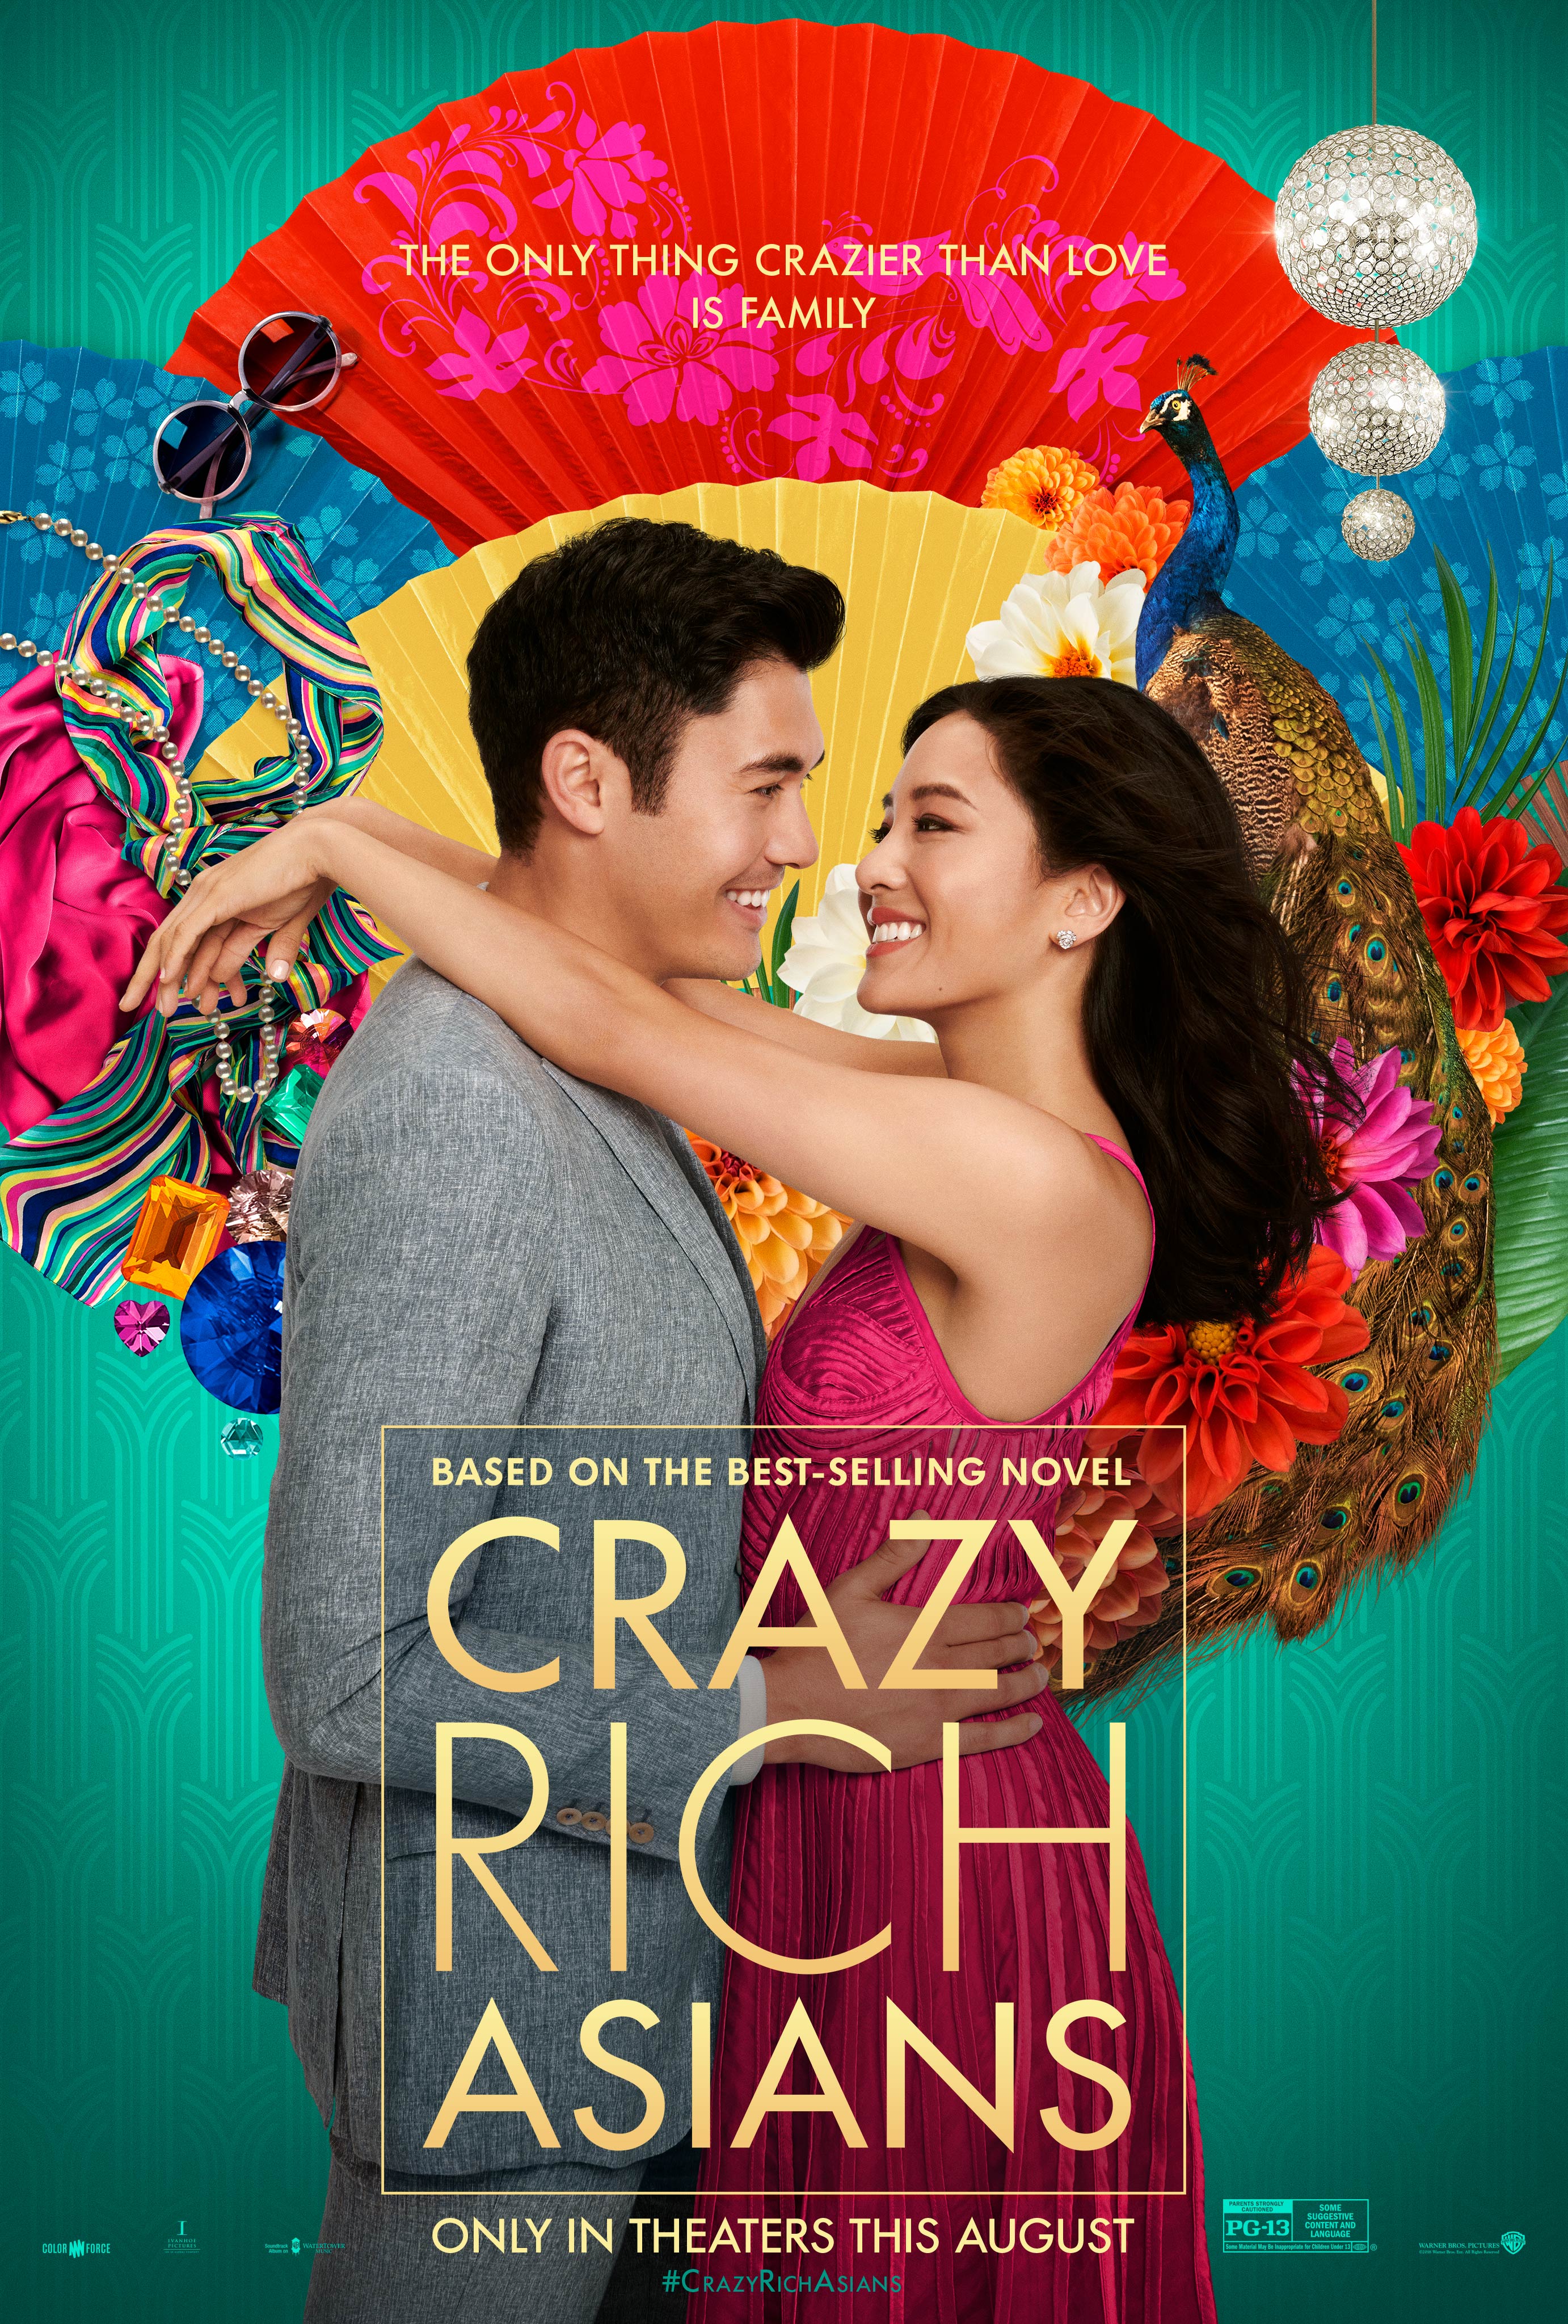 the colorful poster for Crazy Rich Asians, featuring Henry Golding and Constance Wu